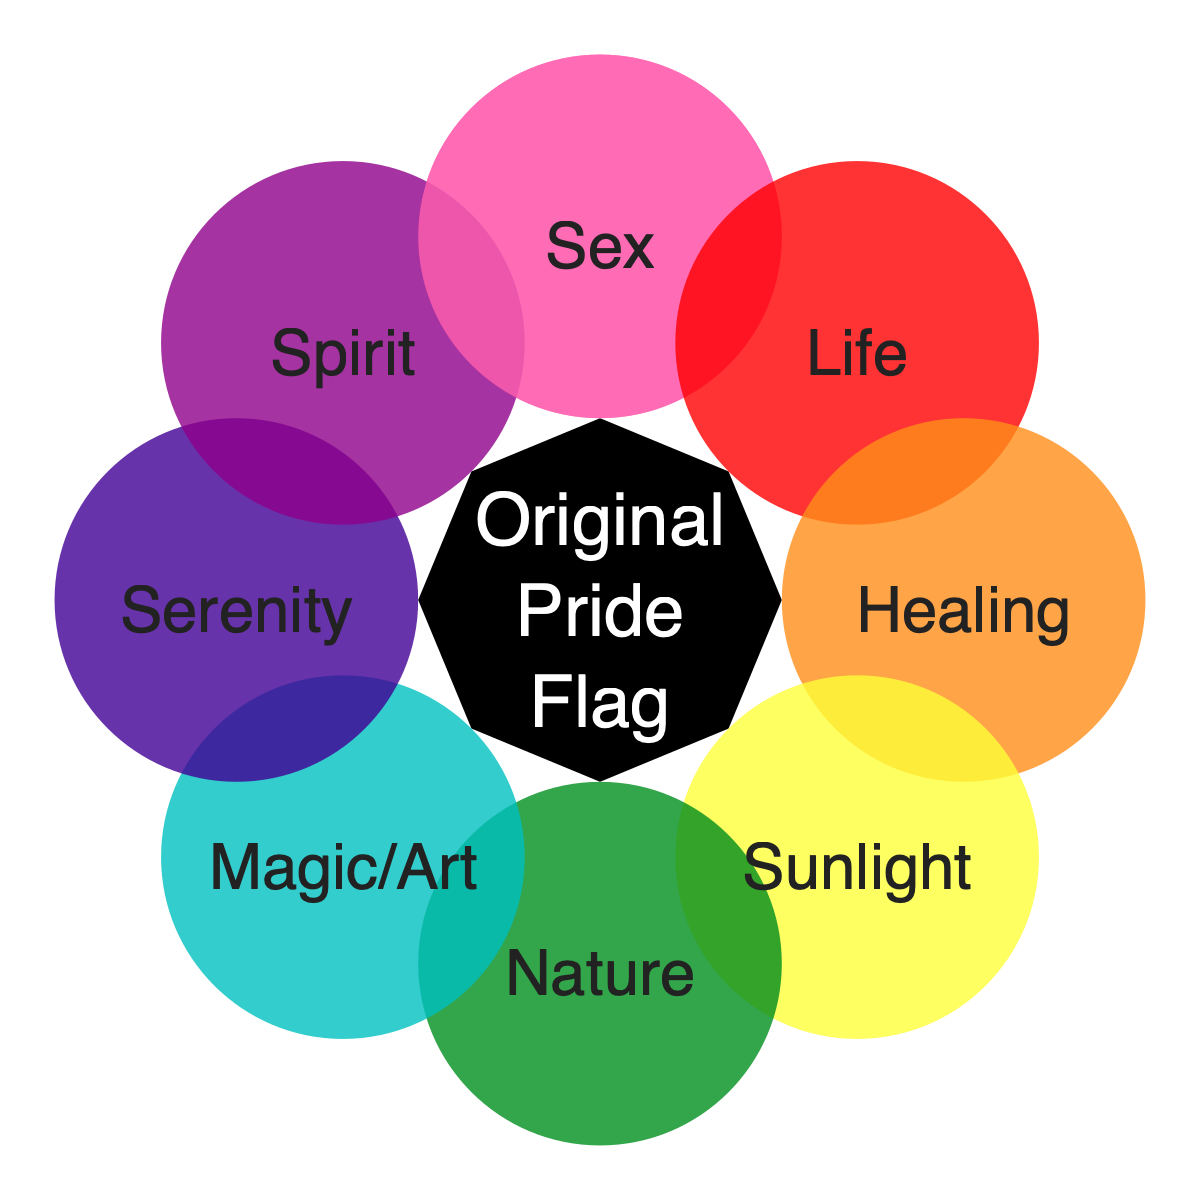 "Flower" chart with 8 "petals", each representing one colour from the original 8-colour pride flag. pink = sex, red = life, orange = healing, yellow = sunlight, green = nature, aqua = magic/art, blue = serenity, purple = spirit